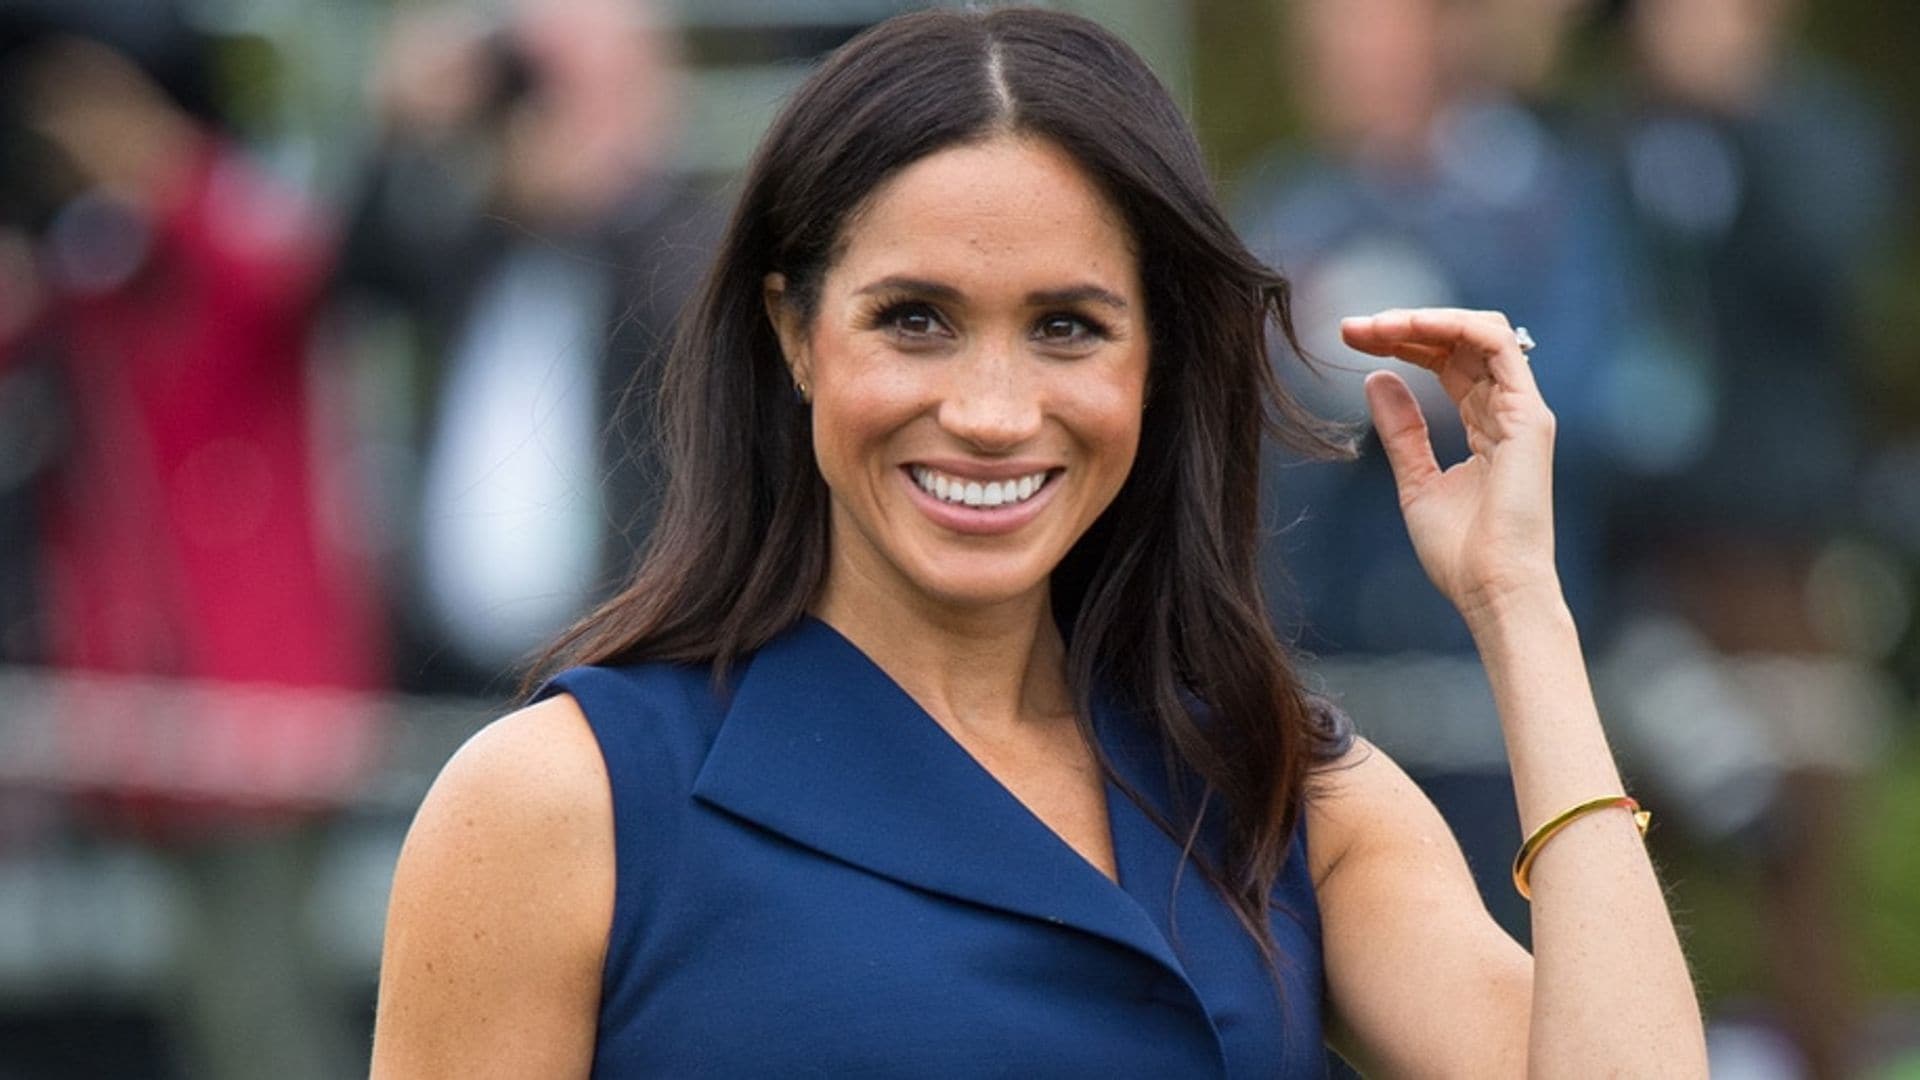 Meghan Markle to walk red carpet for first time as a royal